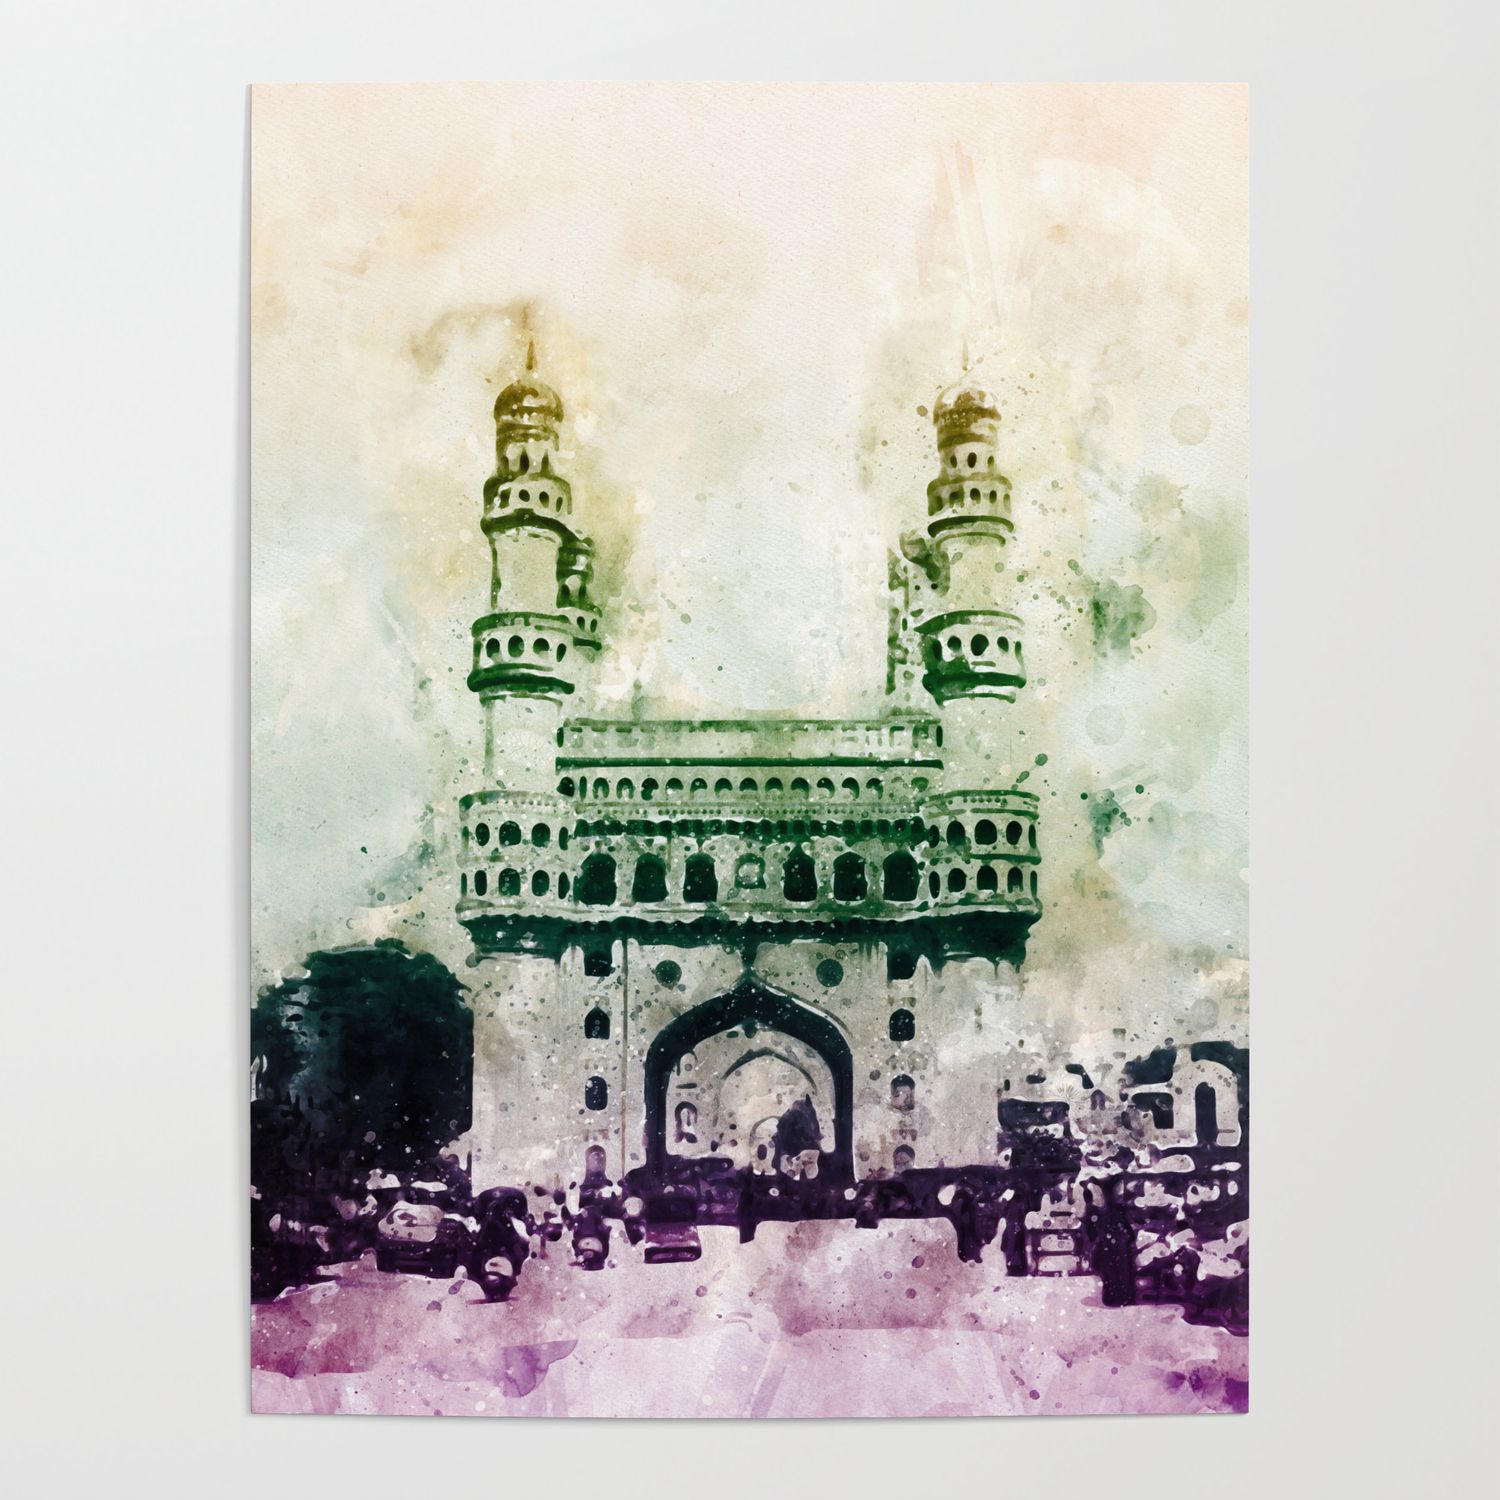 Master Art Print Charminar “Mosque of Four Minarets” Monument 12in x 18in Inc. Hyderabad Deuskar c.1930 Pacifica Island Art See India India Vintage World Travel Poster by C.D